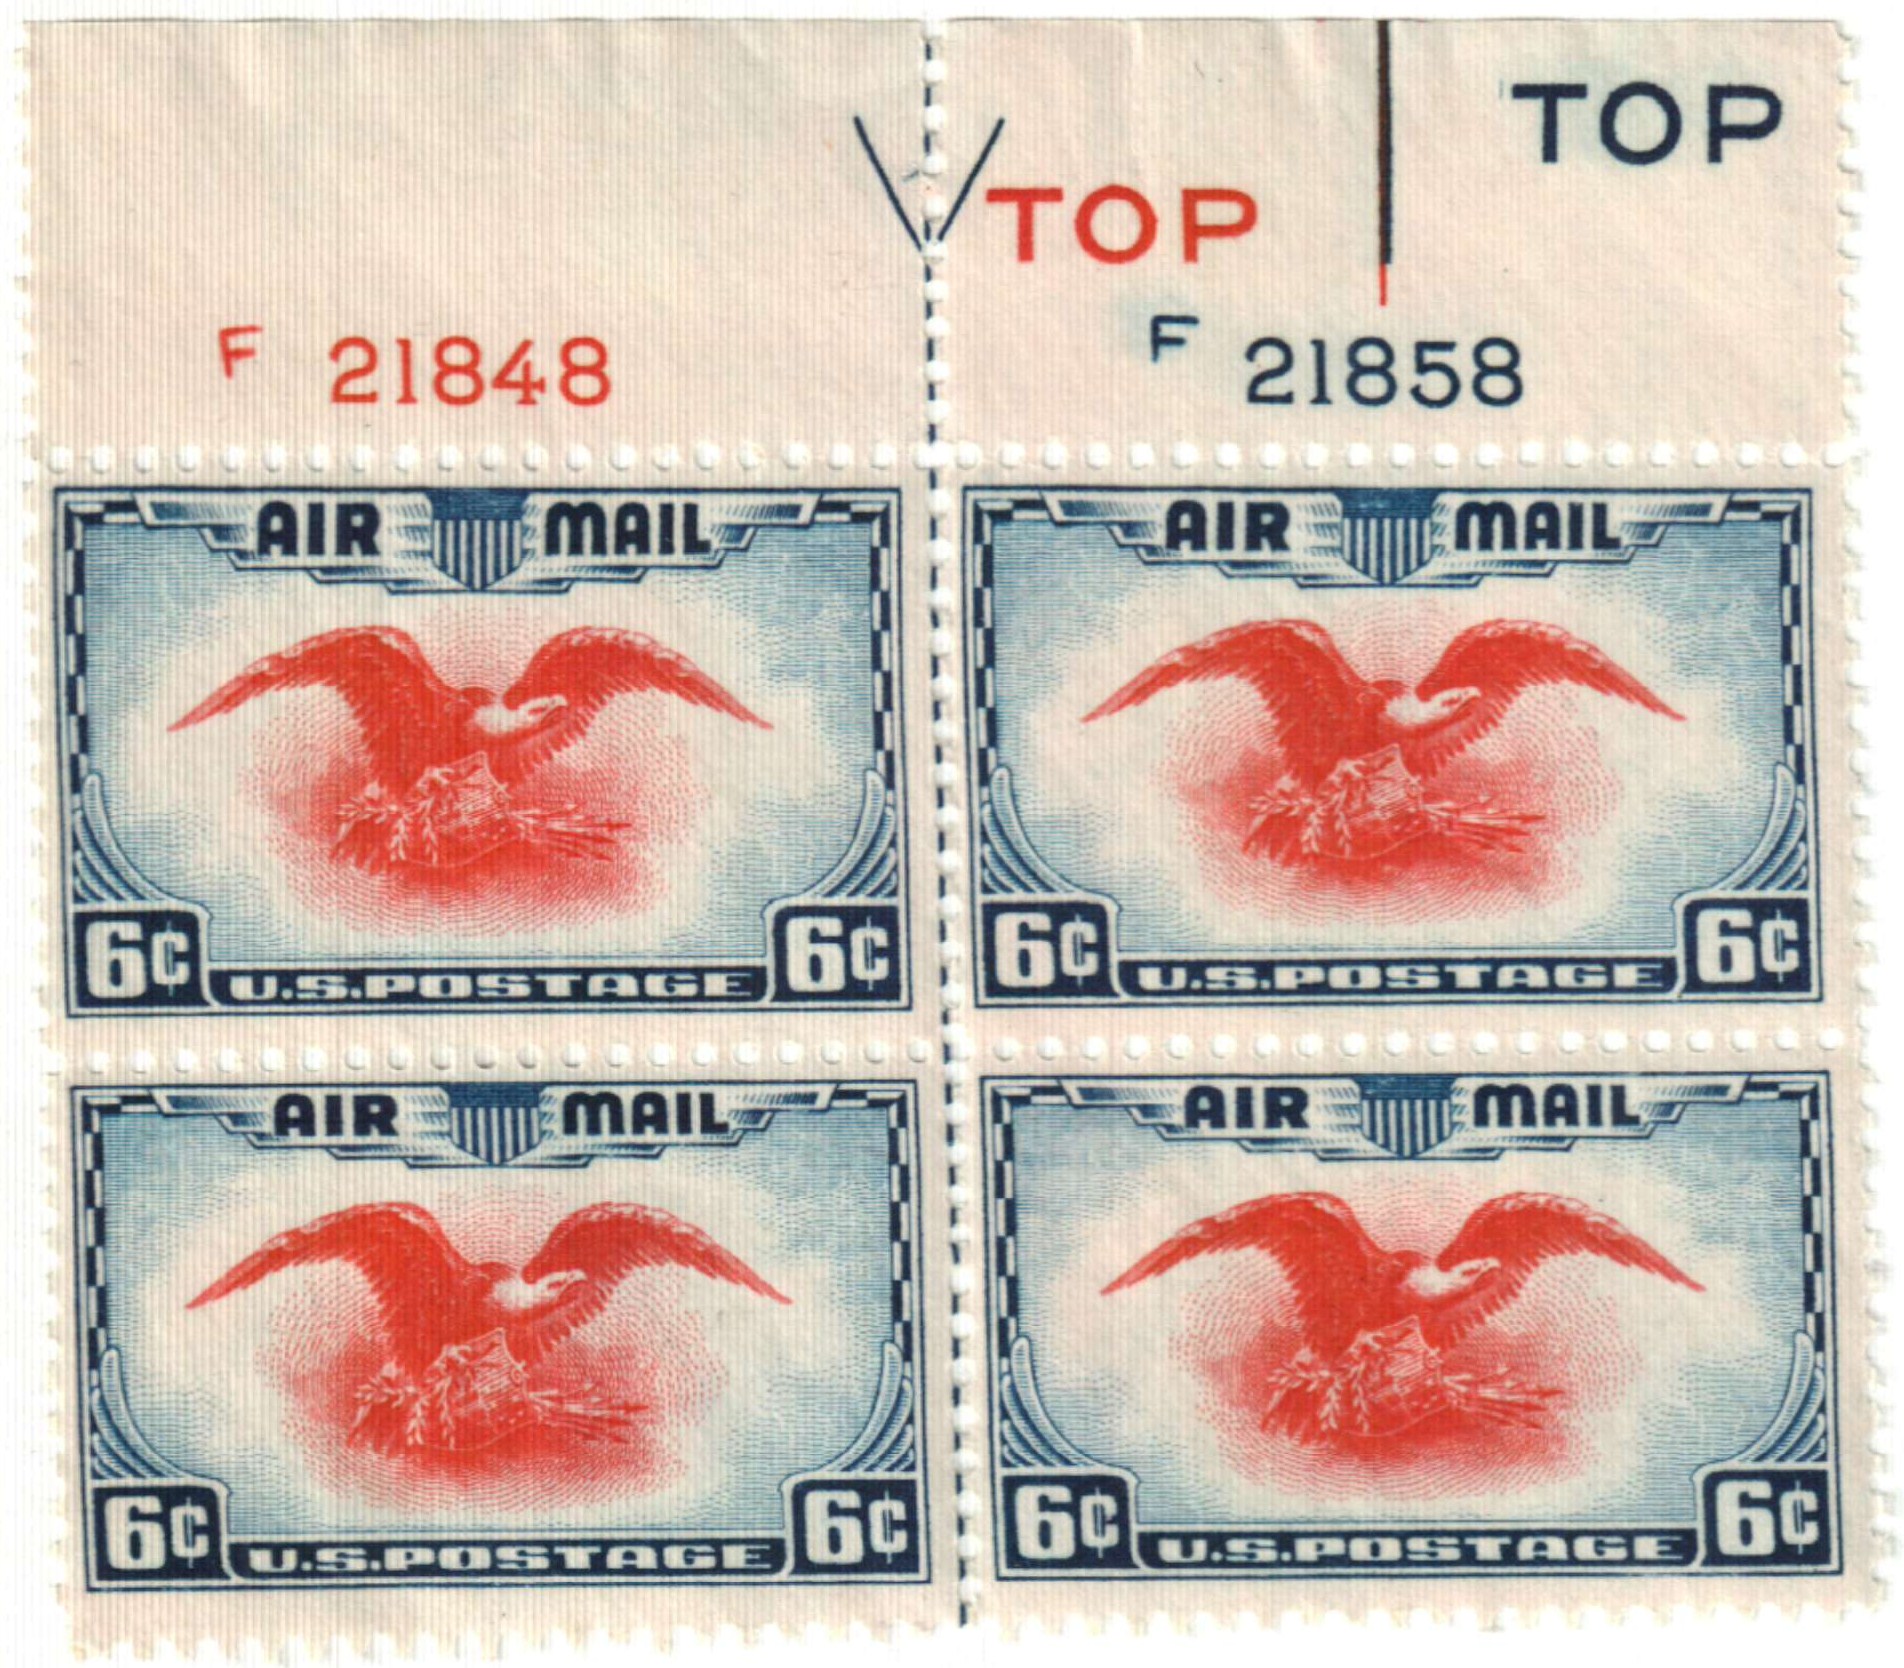 How Much Are Stamps? - US Global Mail